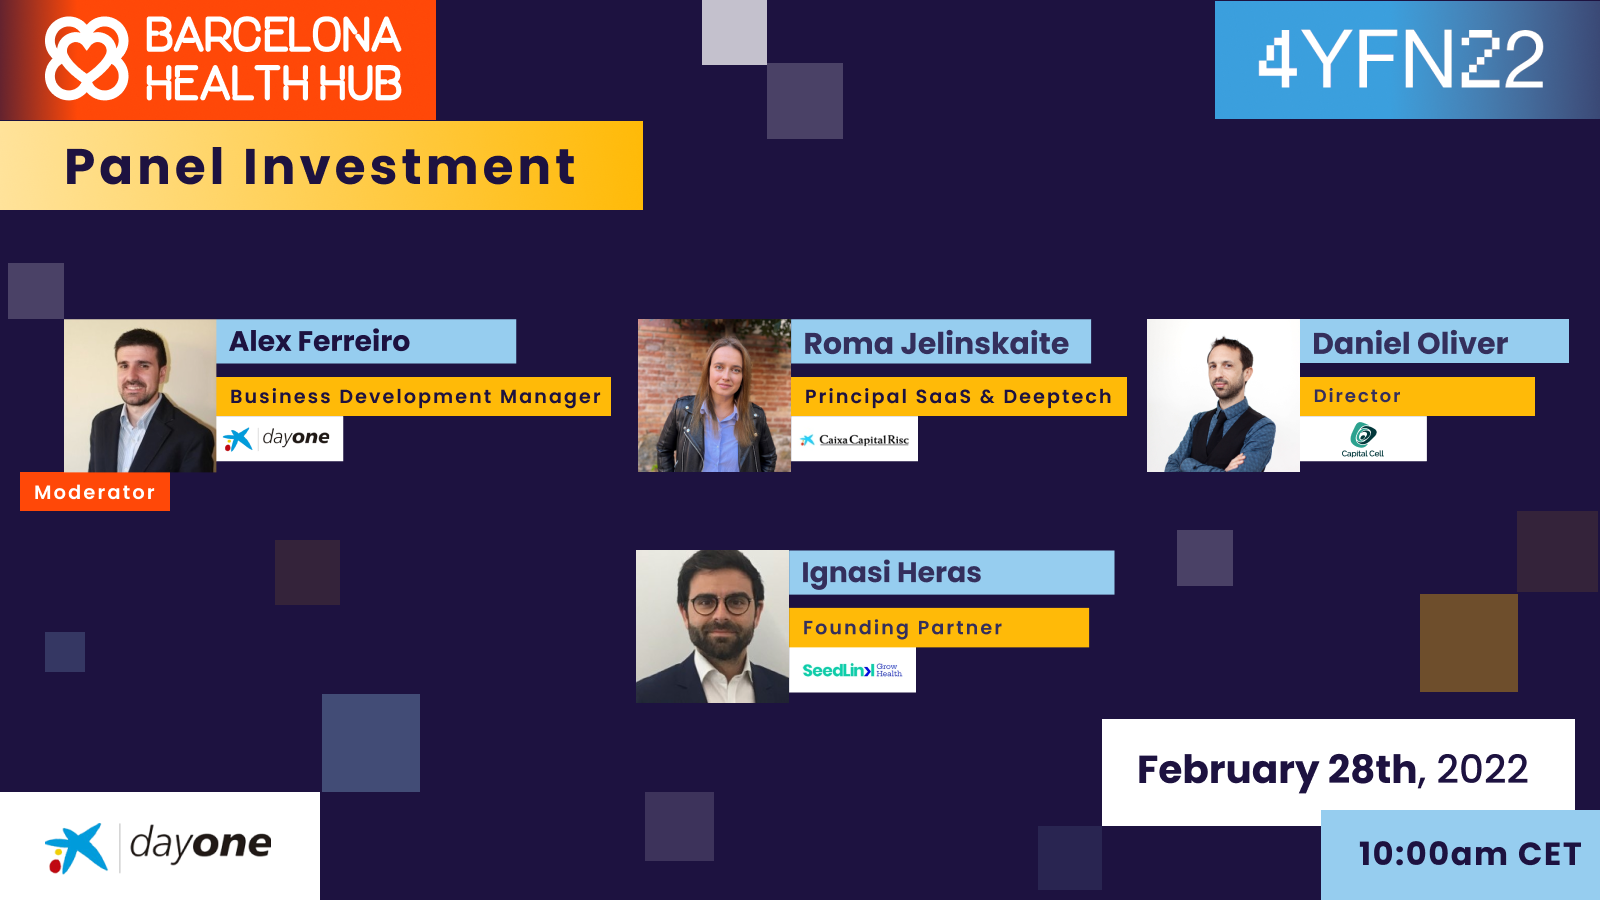 4YFN - Don't miss the #BHHPanel about Investment on February 28th!